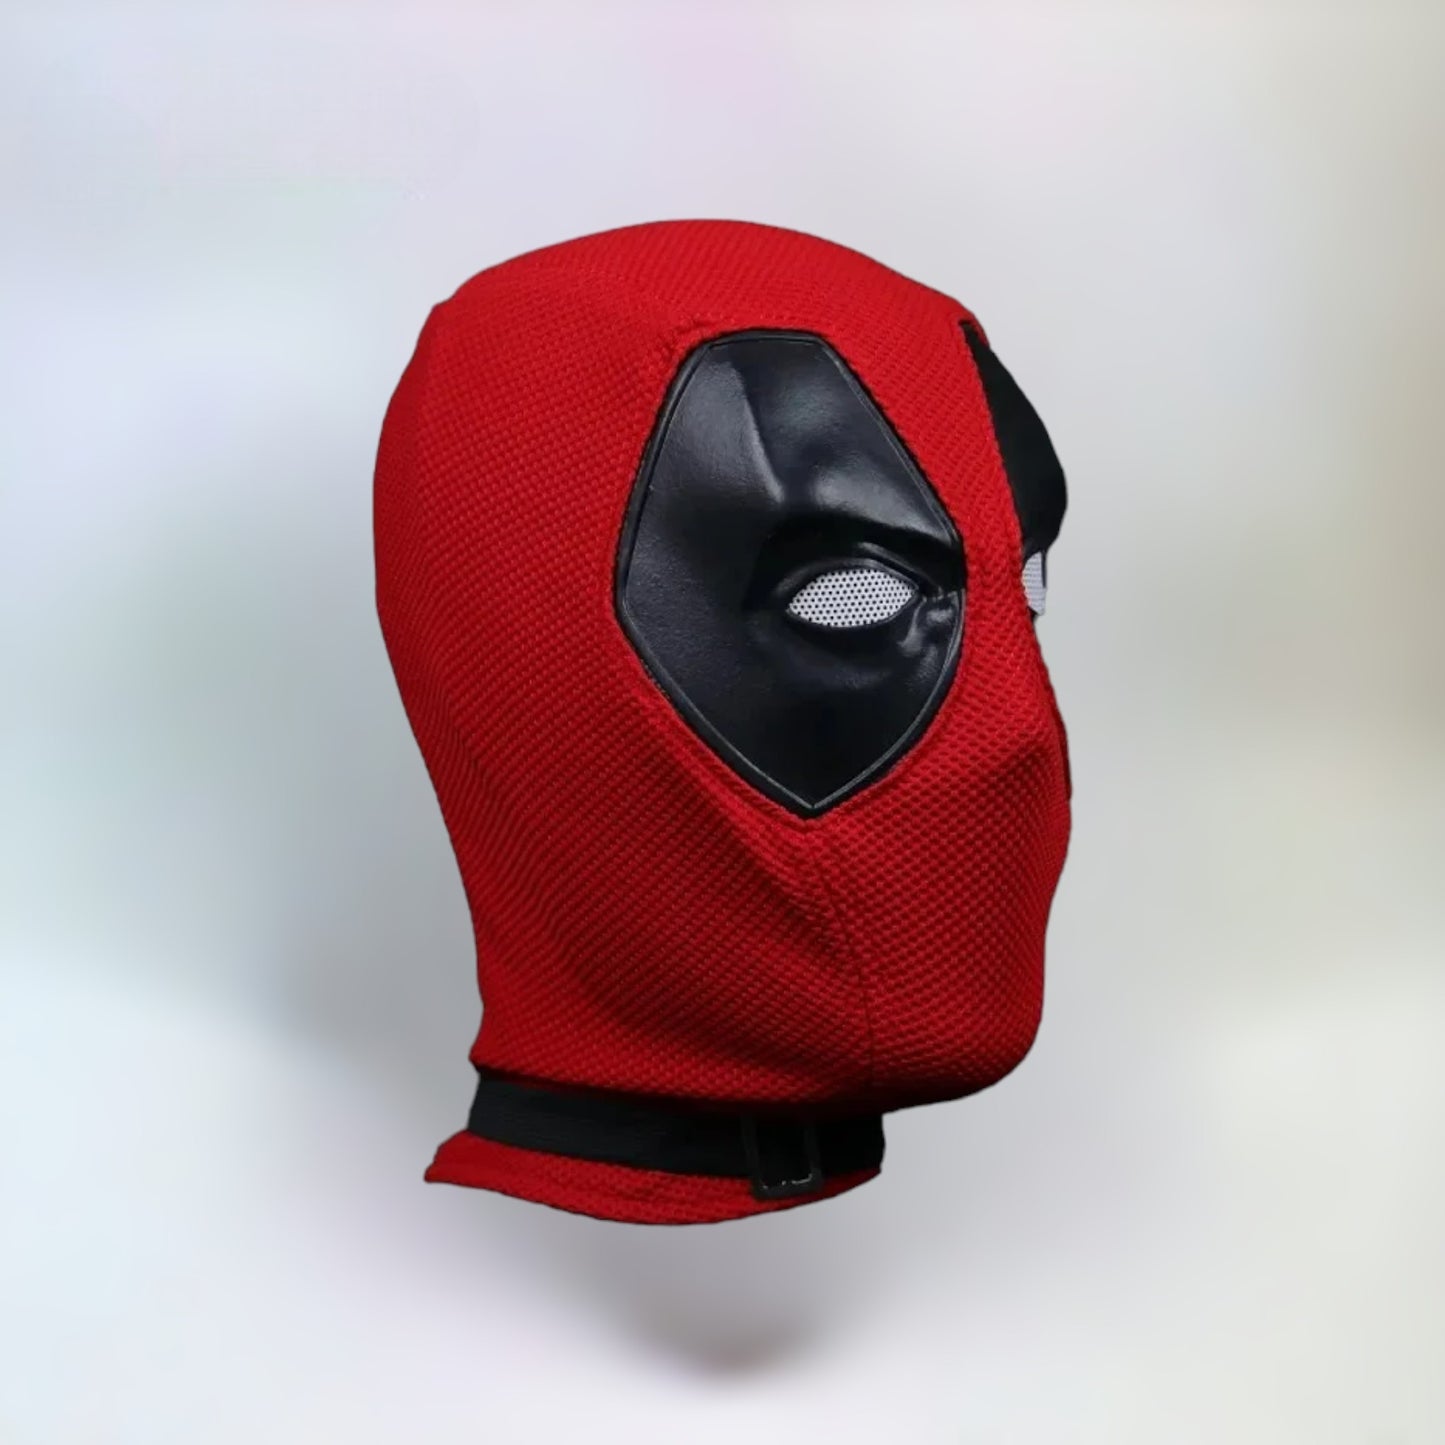 Deadpool mask fabric and leather eyes, deadpool and wolverine, deadpool mask side view with plain white background.